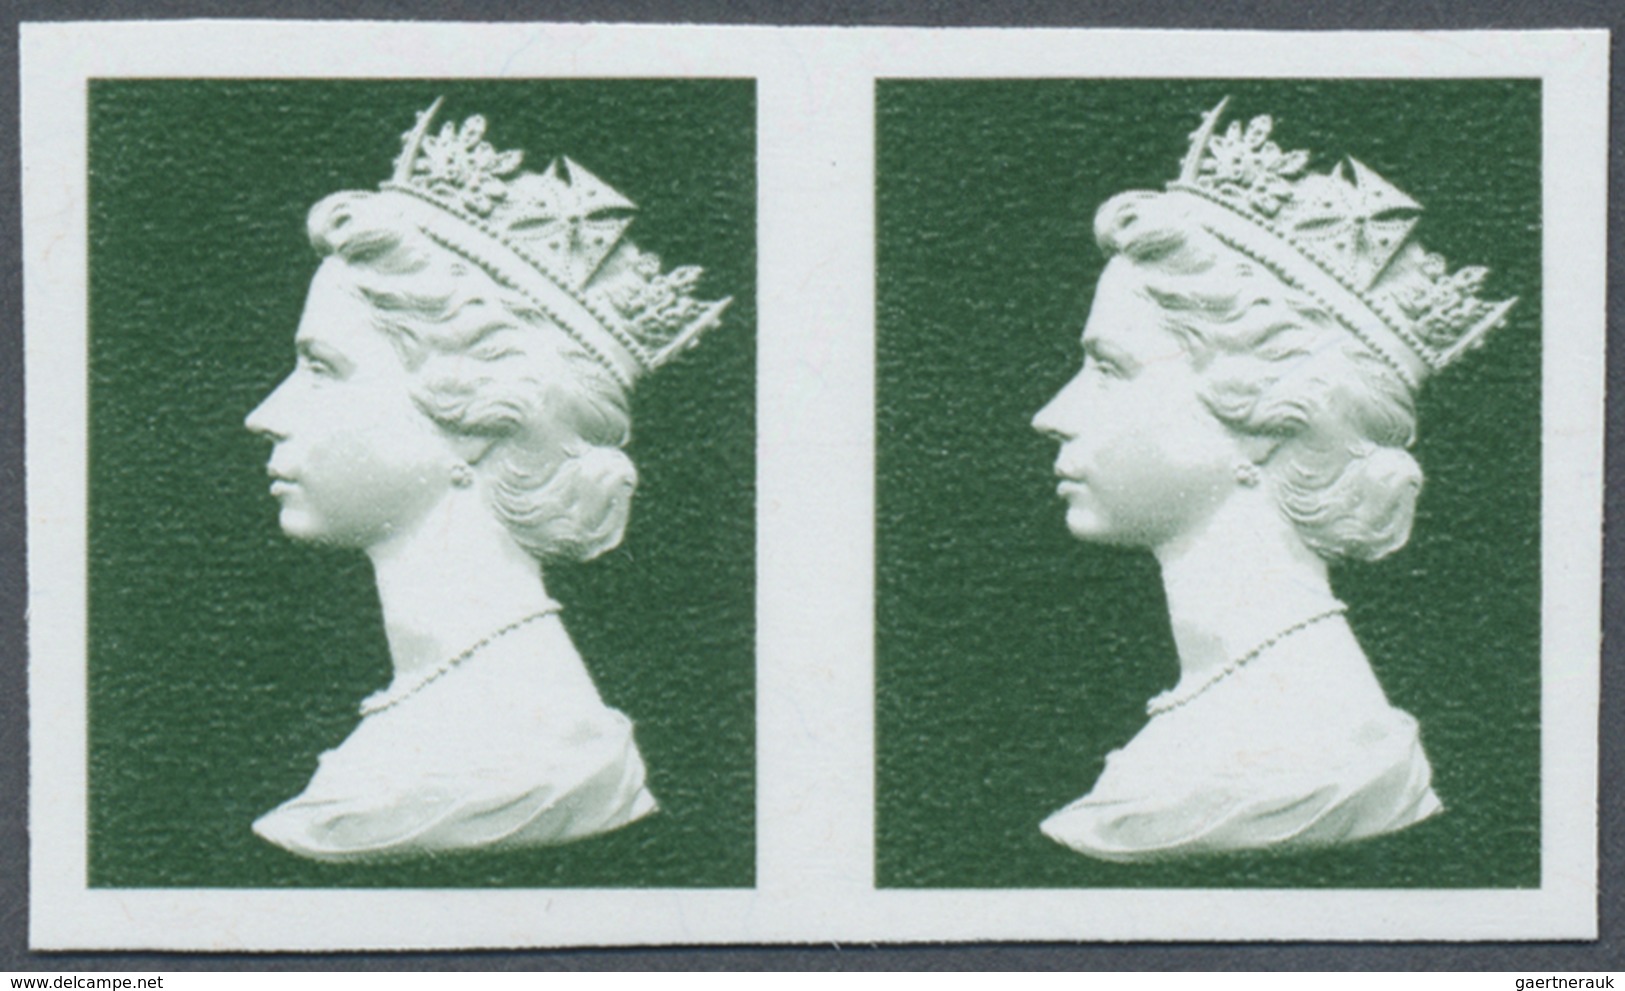 ** Großbritannien - Machin: 1997, Imperforate Proof In Issued Design Without Value On Gummed Paper, Hor - Série 'Machin'